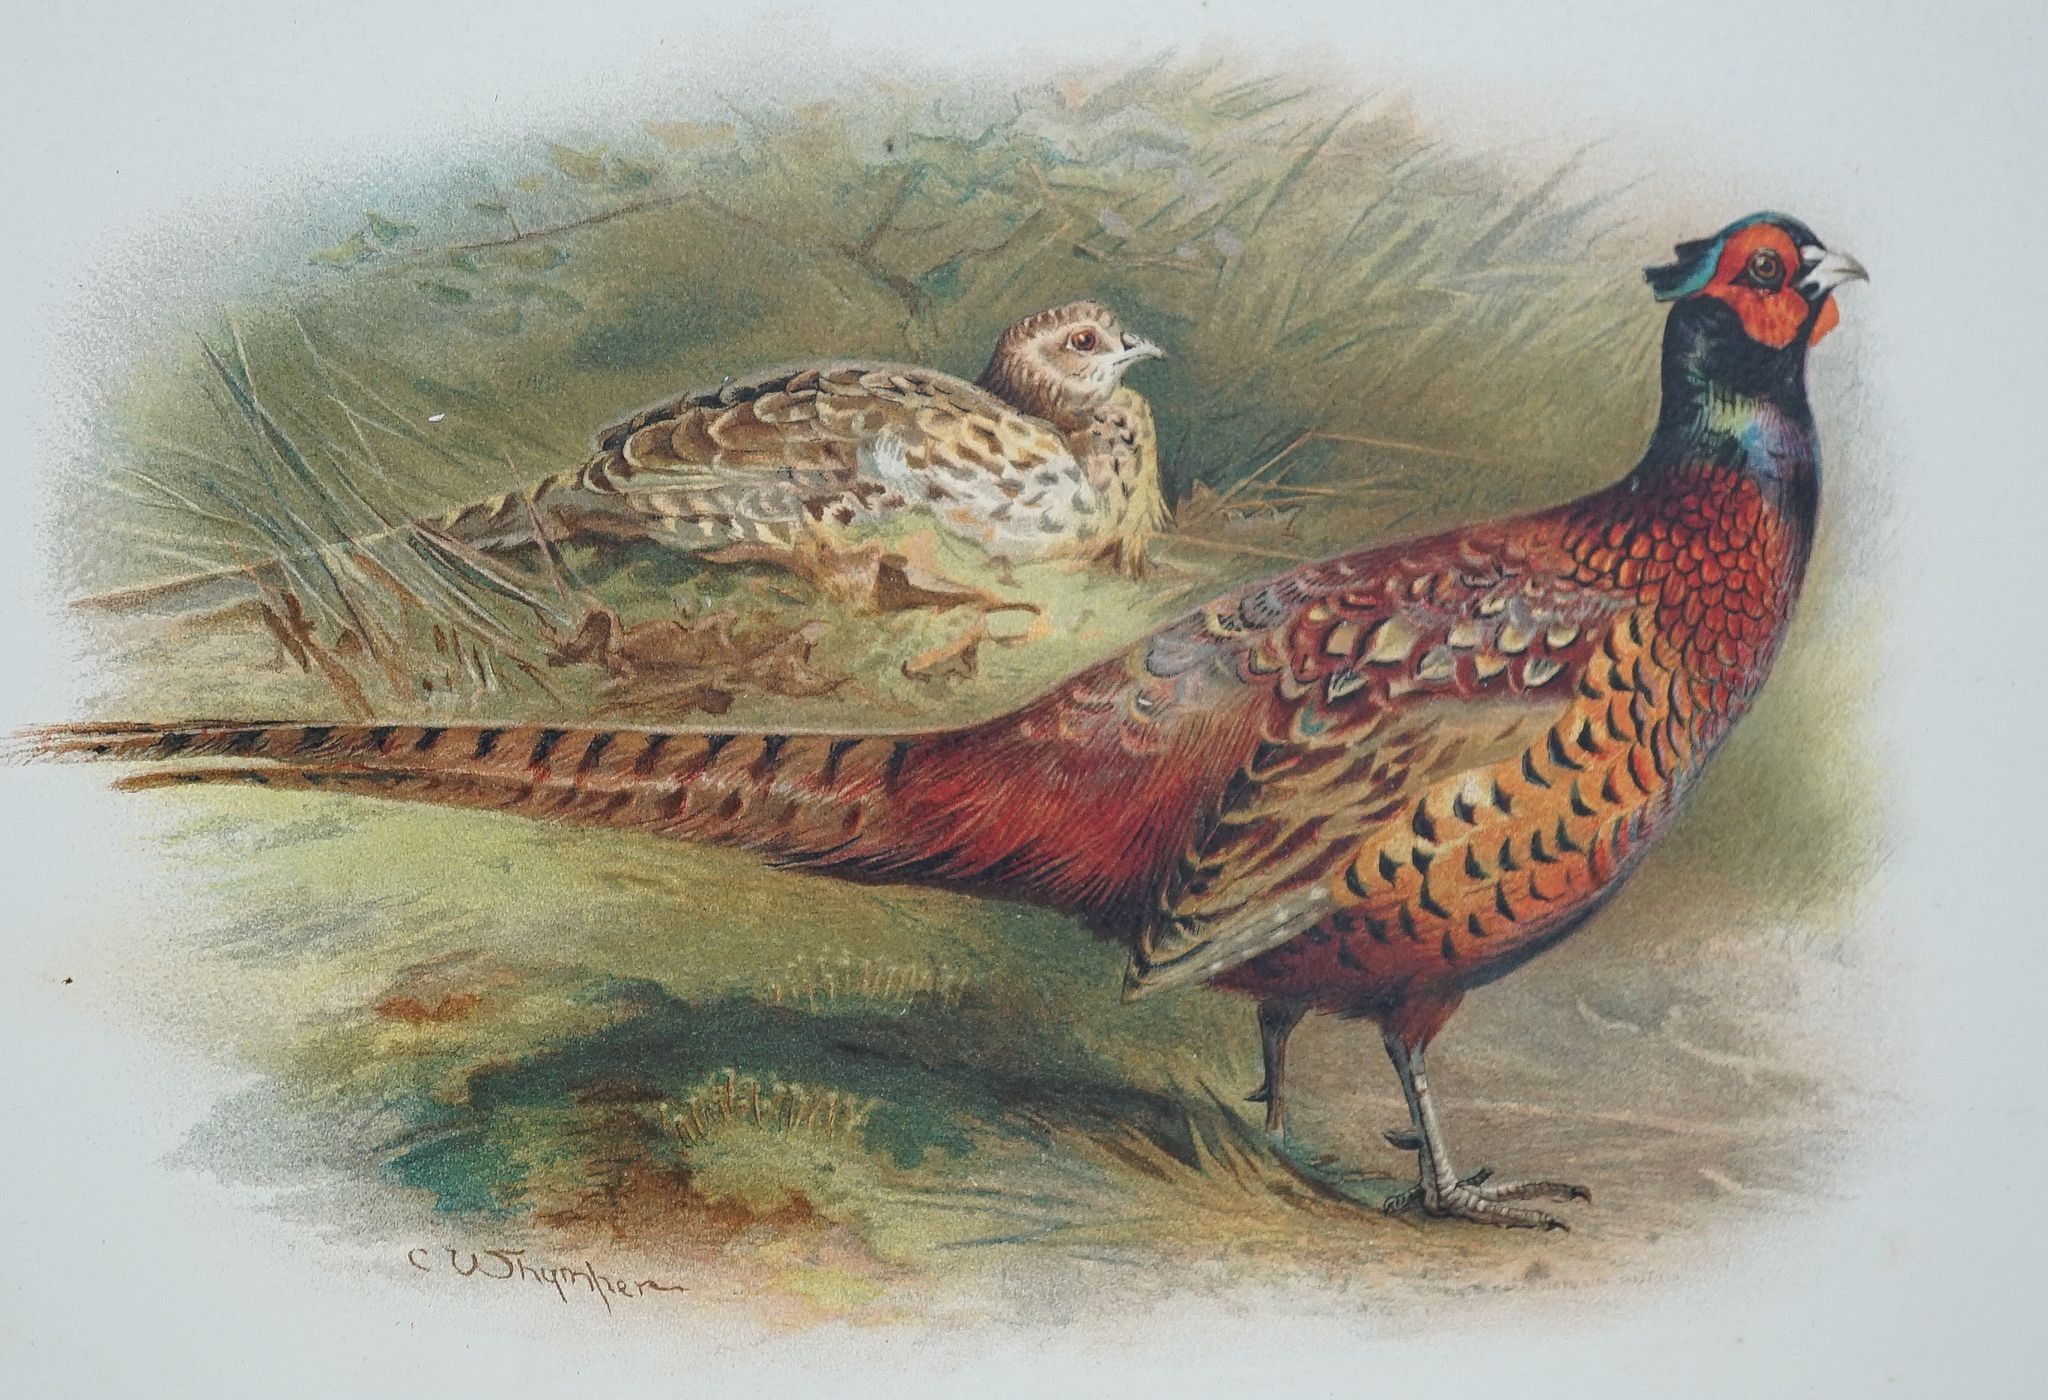 Dixon, Charles - The Game Birds and Wild Fowl of the British Islands. Edition de Luxe (of 100 numbered copies) of the 2nd (enlarged, improved and thorough revised) edition. 41 coloured plates (by Charles Whymper) mounted